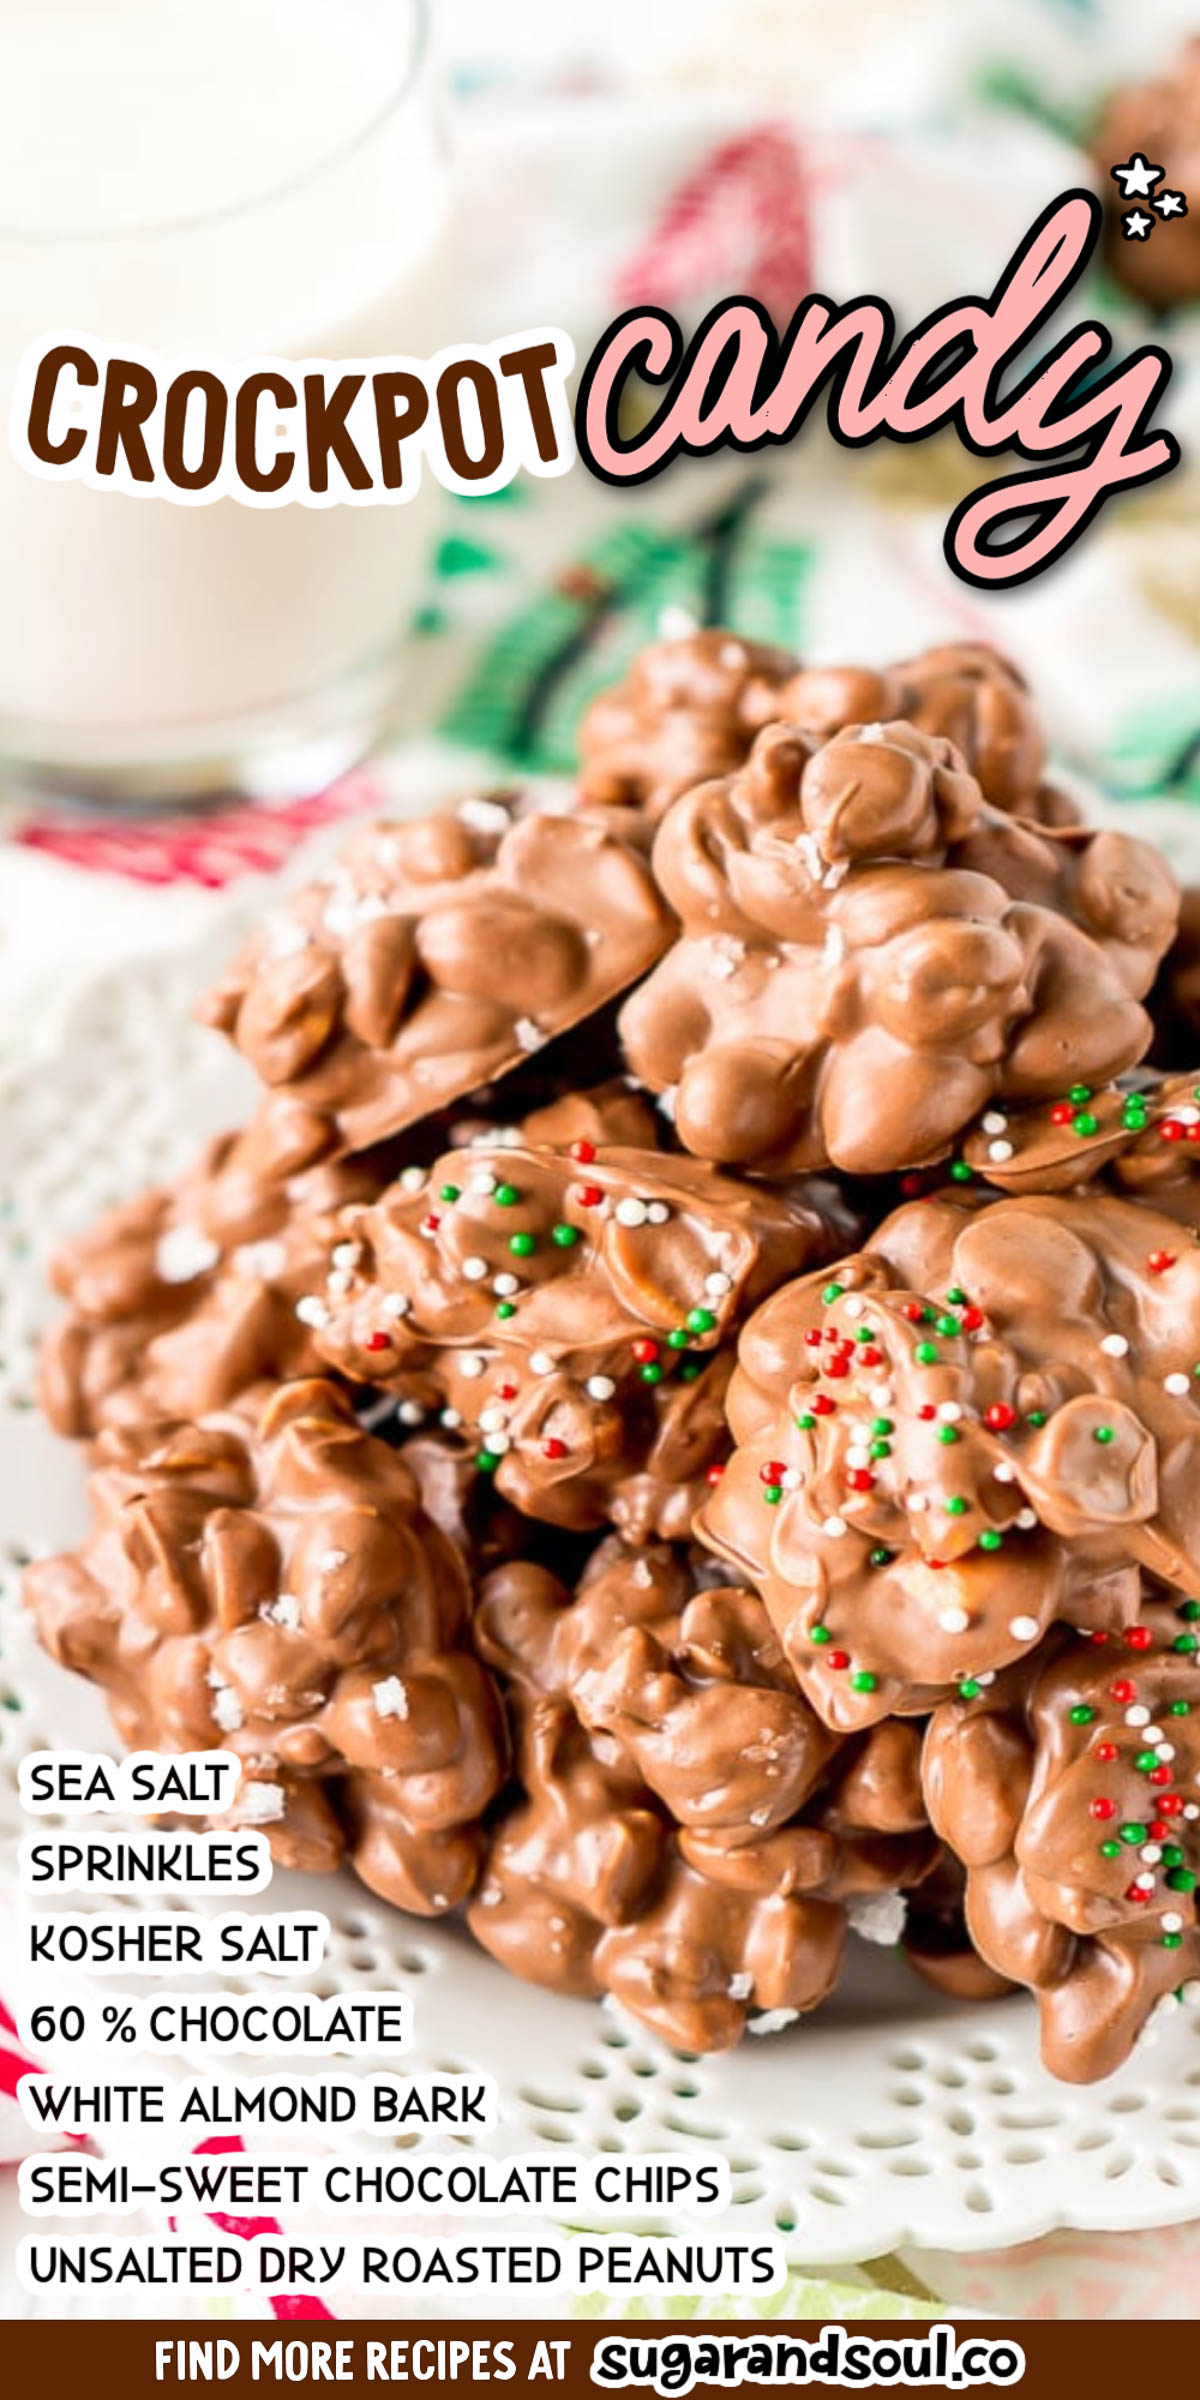 Crockpot Candy is an easy recipe loaded with peanuts, almond bark, and lots of chocolate and super simple to make in the slow cooker! Topped with some festive sprinkles, this pop-in-your-mouth treat is perfect for sharing at holiday parties.  via @sugarandsoulco